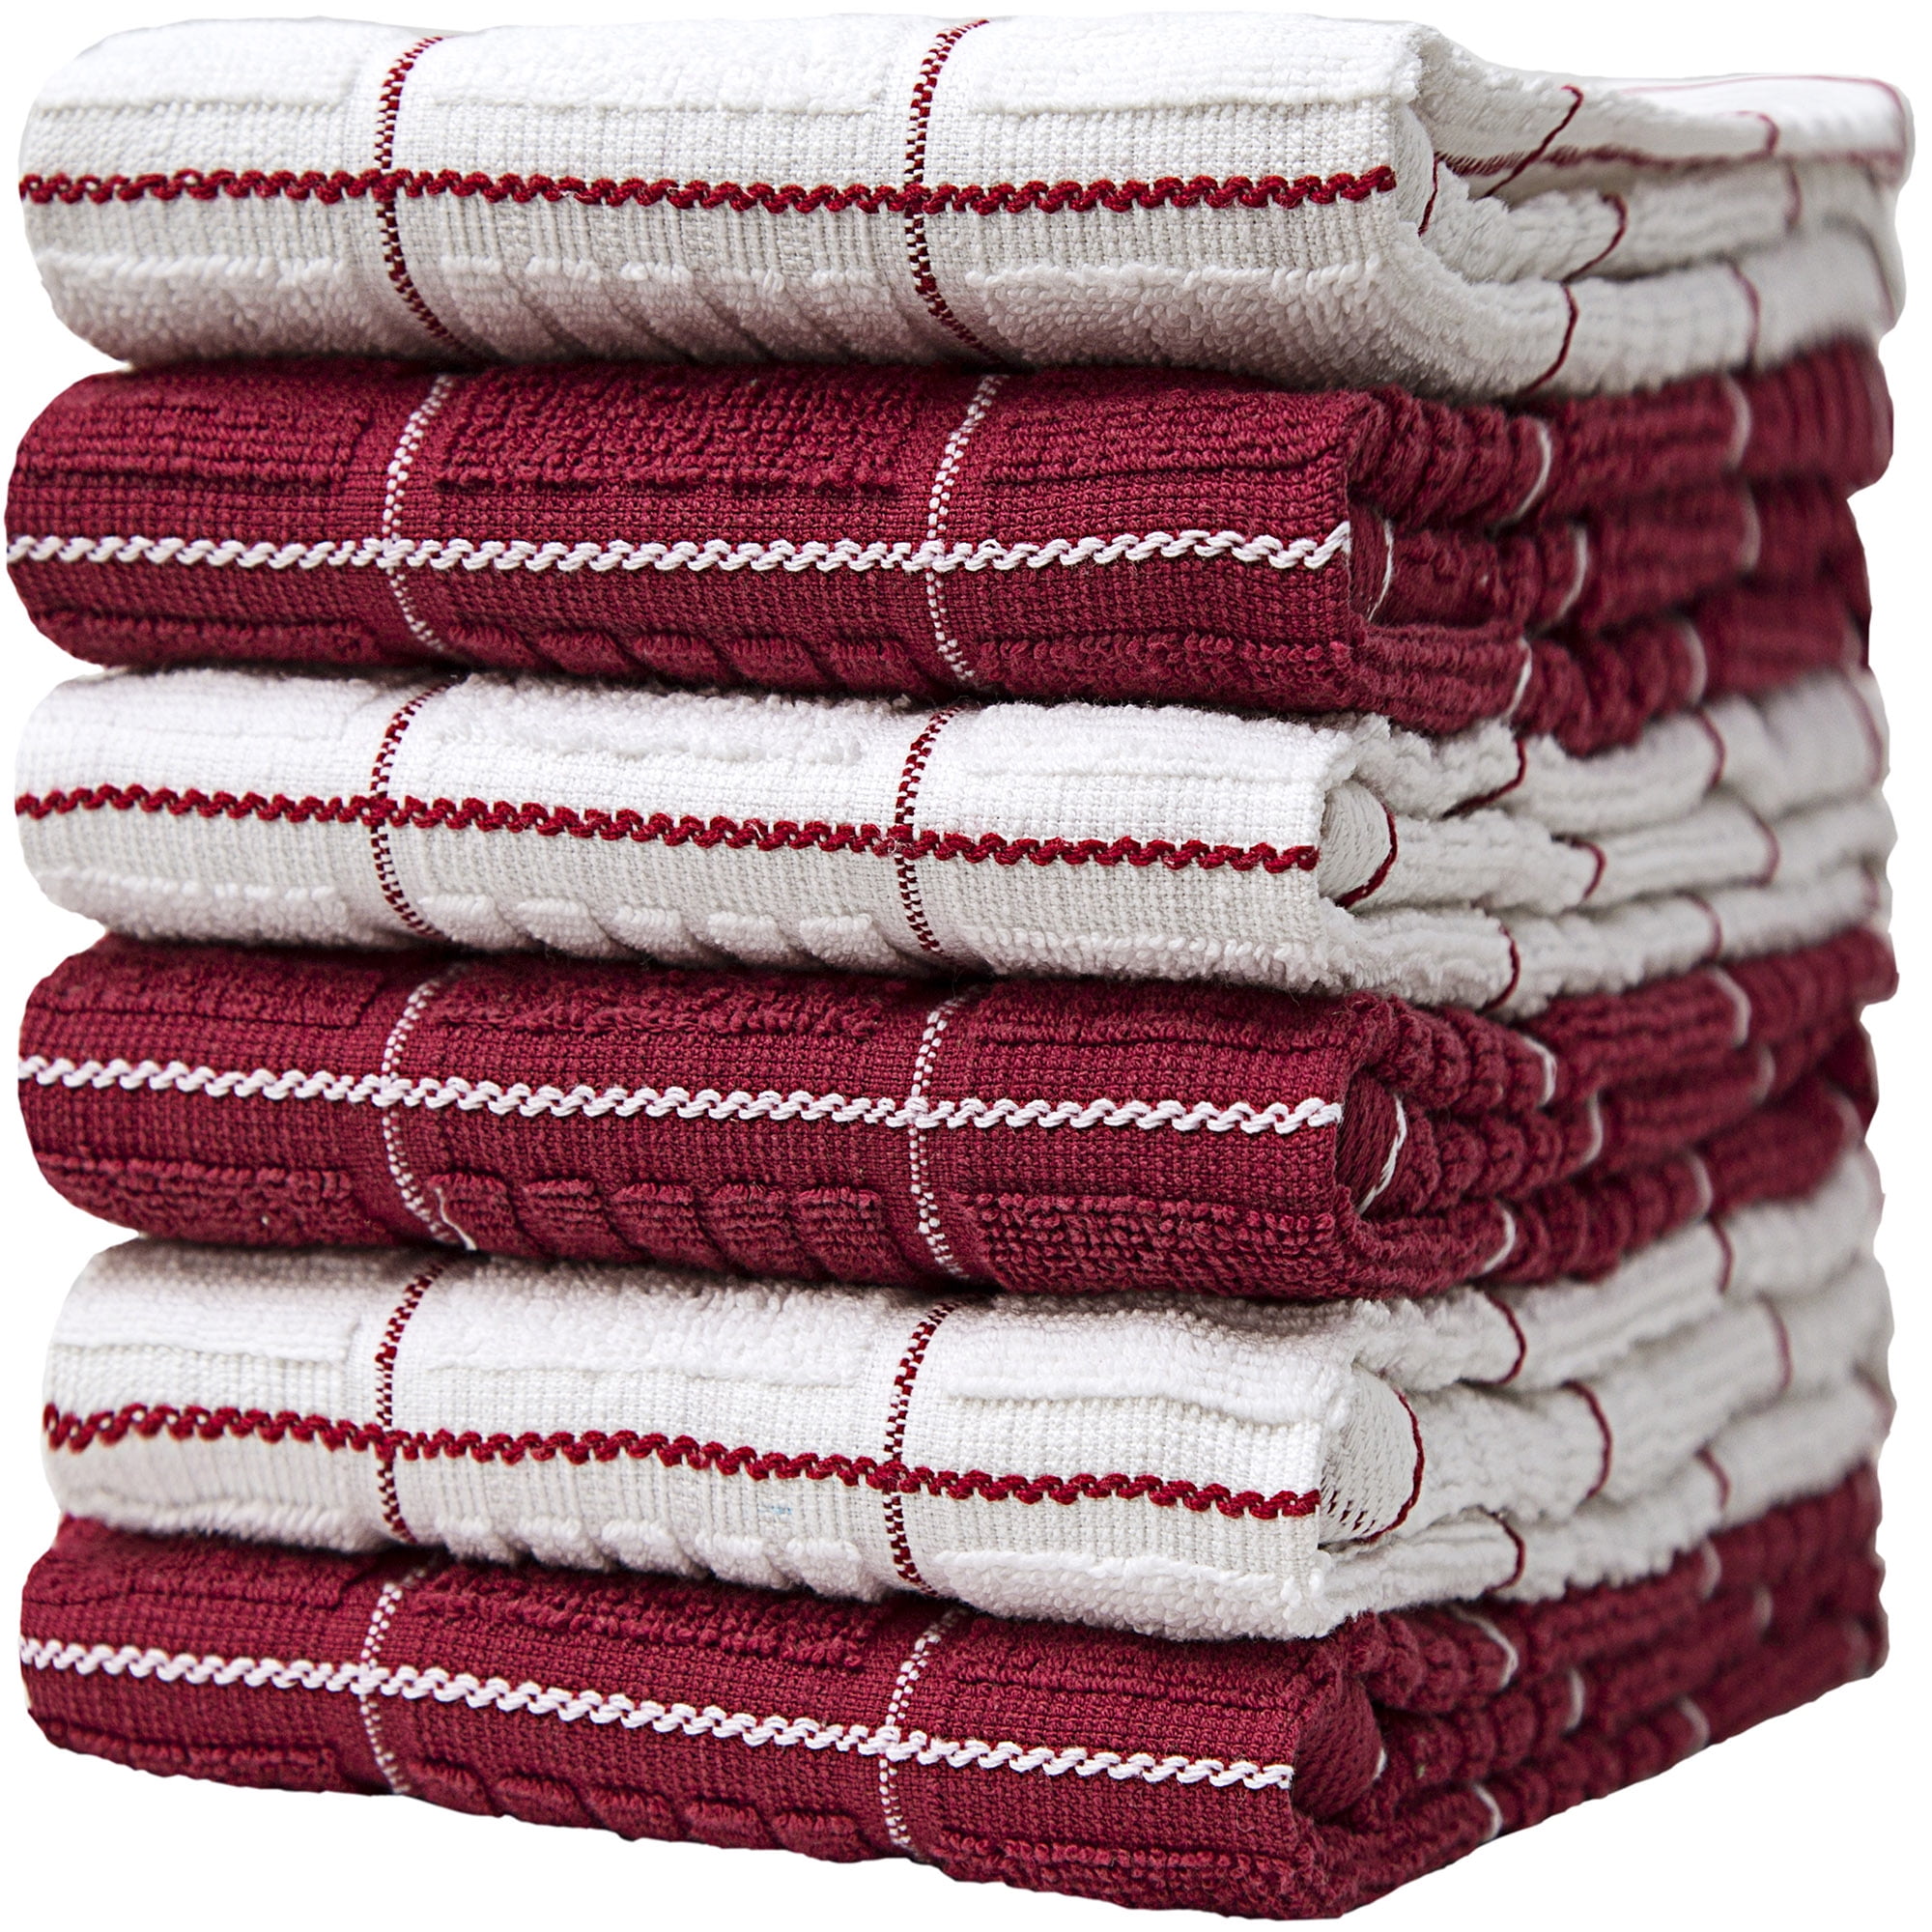 Costco Deals - ❤️These 17”x28” #organic #kitchen #towels